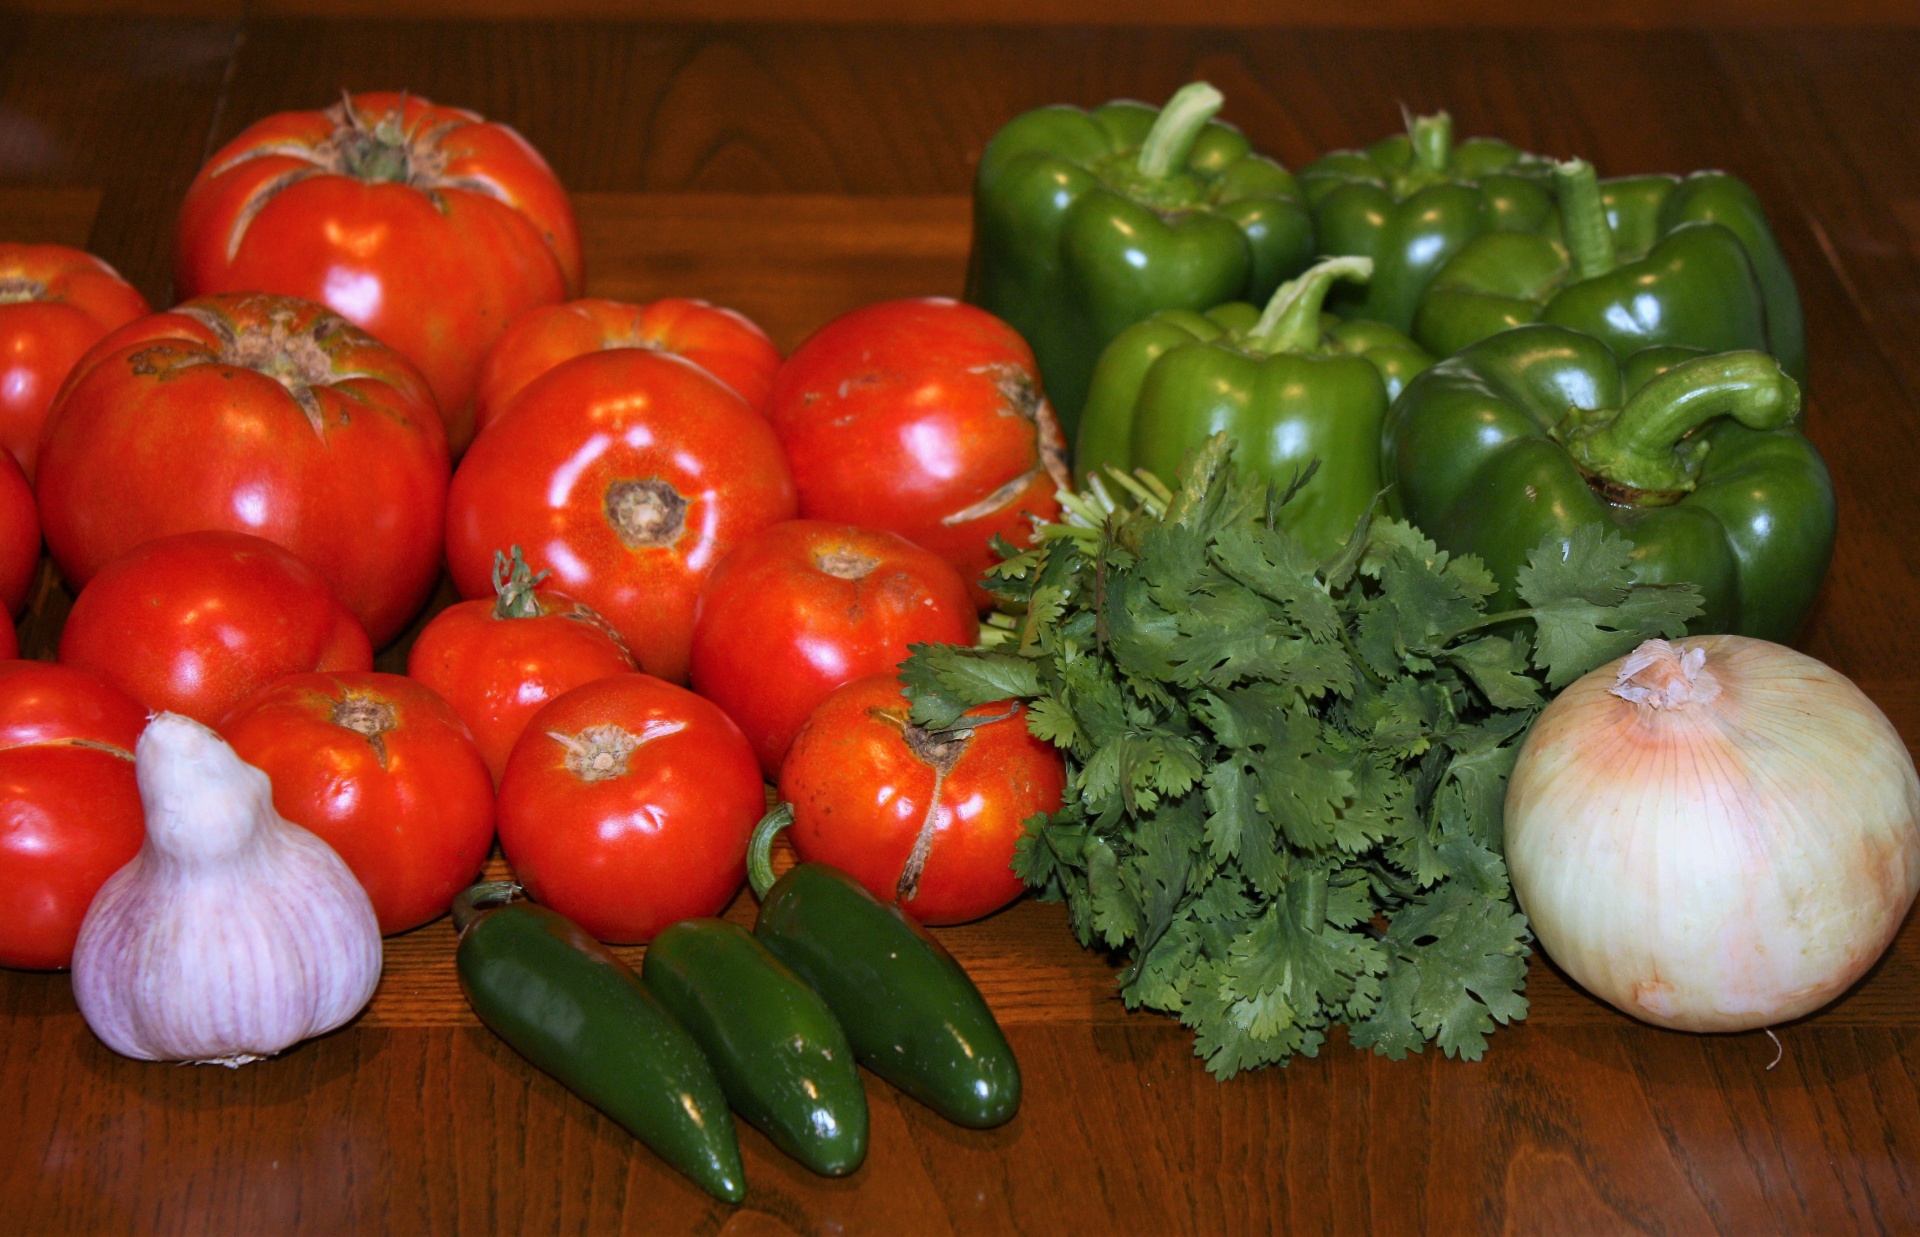 Fresh vegetables, tomatoes, cilantro, jalapeno peppers, onion, garlic, and bell peppers arranged on a brown kitchen table. These are ingredients for making homemade picante sauce.